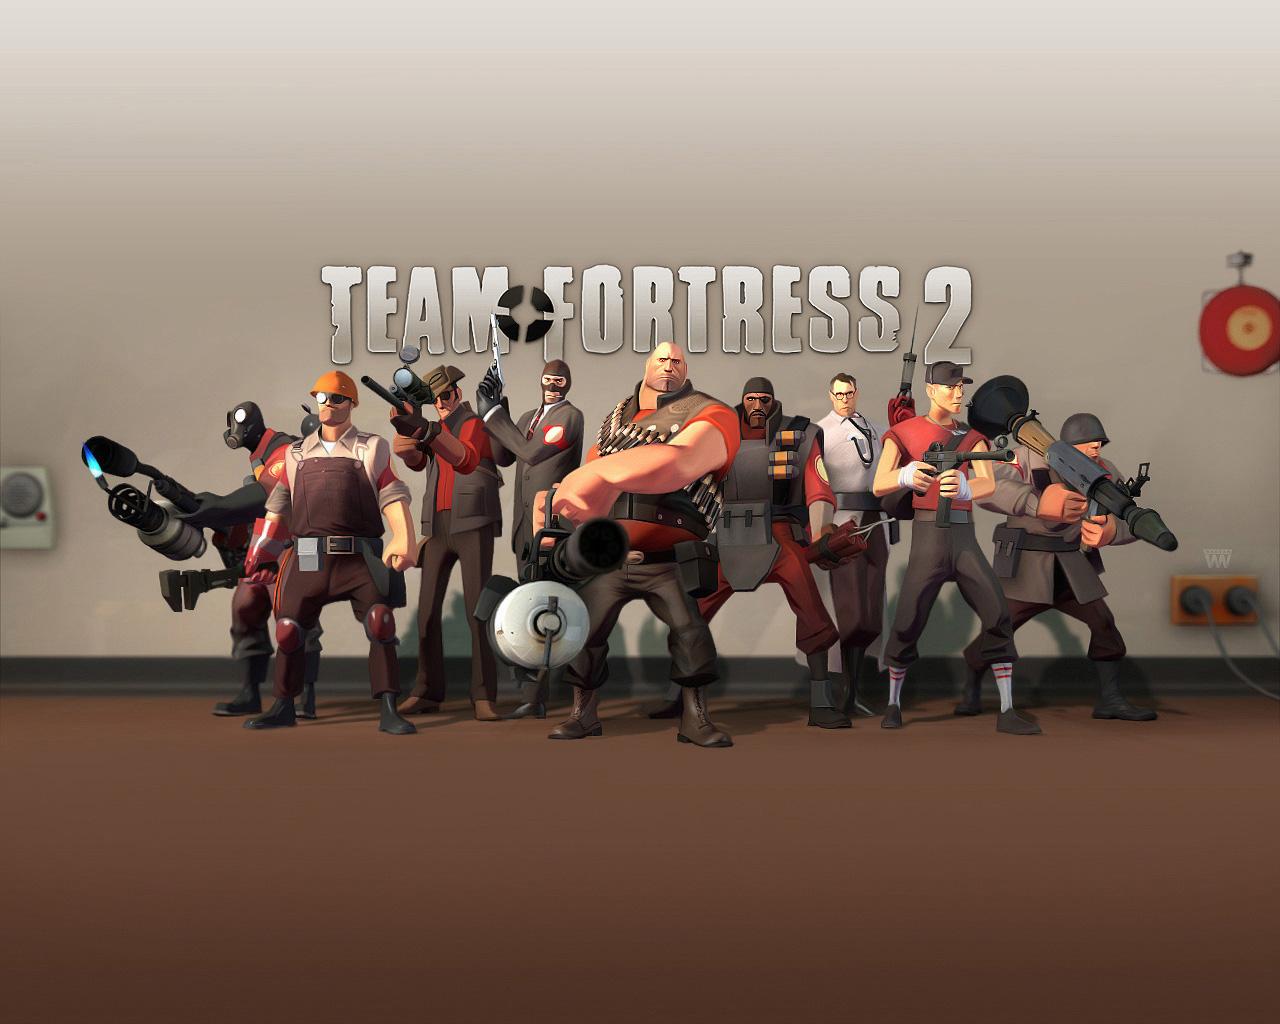 1280x1024 Pyro (Team Fortress) wallpaper for computer